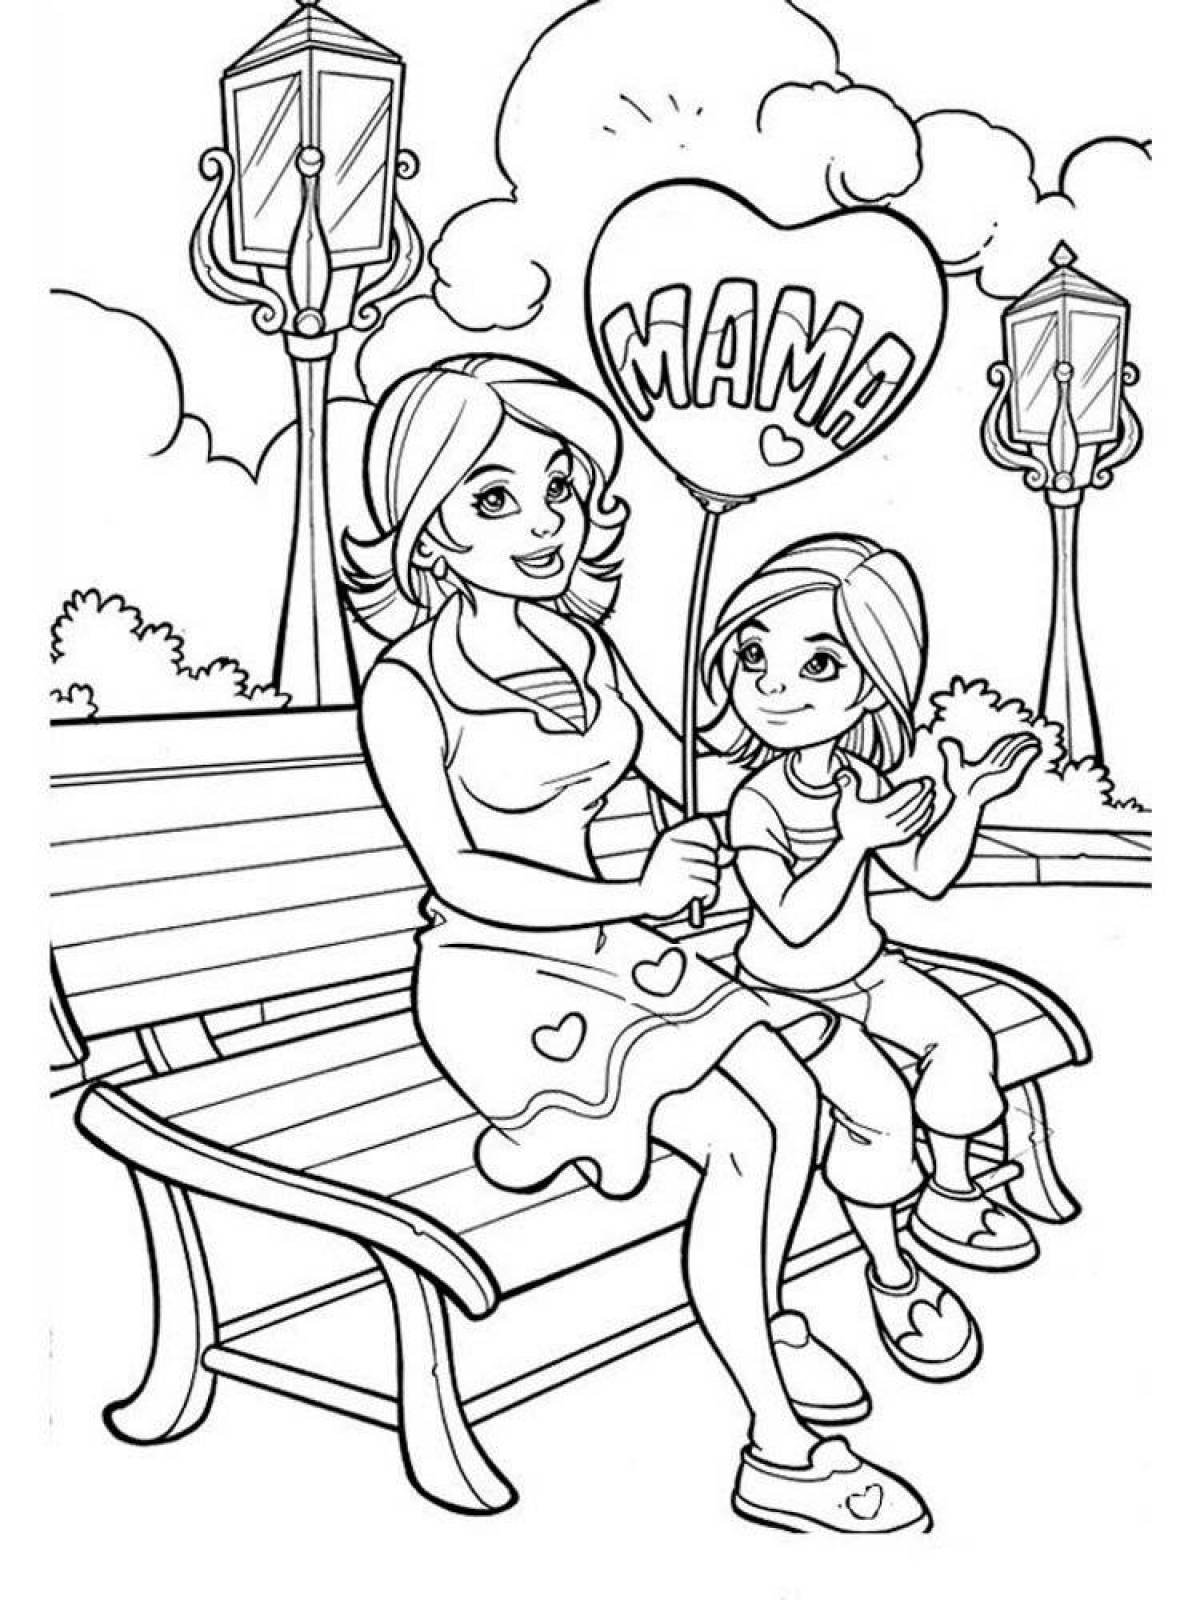 Coloring page shining mother